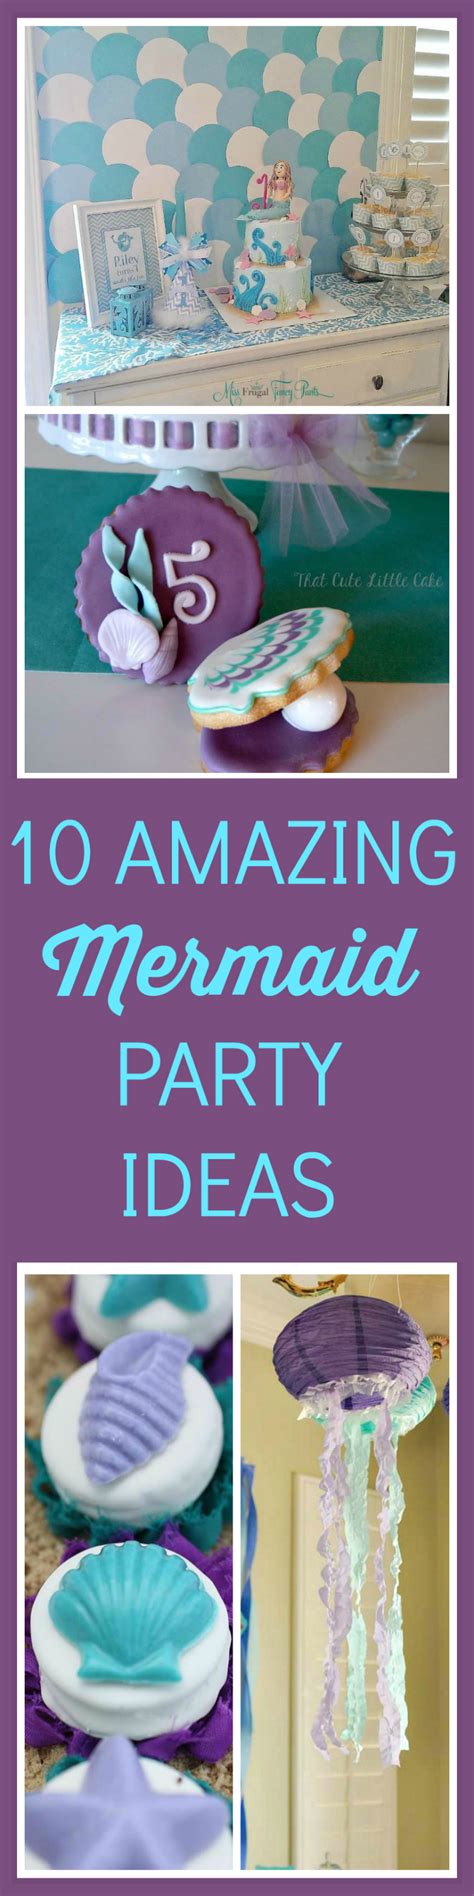 10 Amazing Mermaid Party Ideas Catch My Party